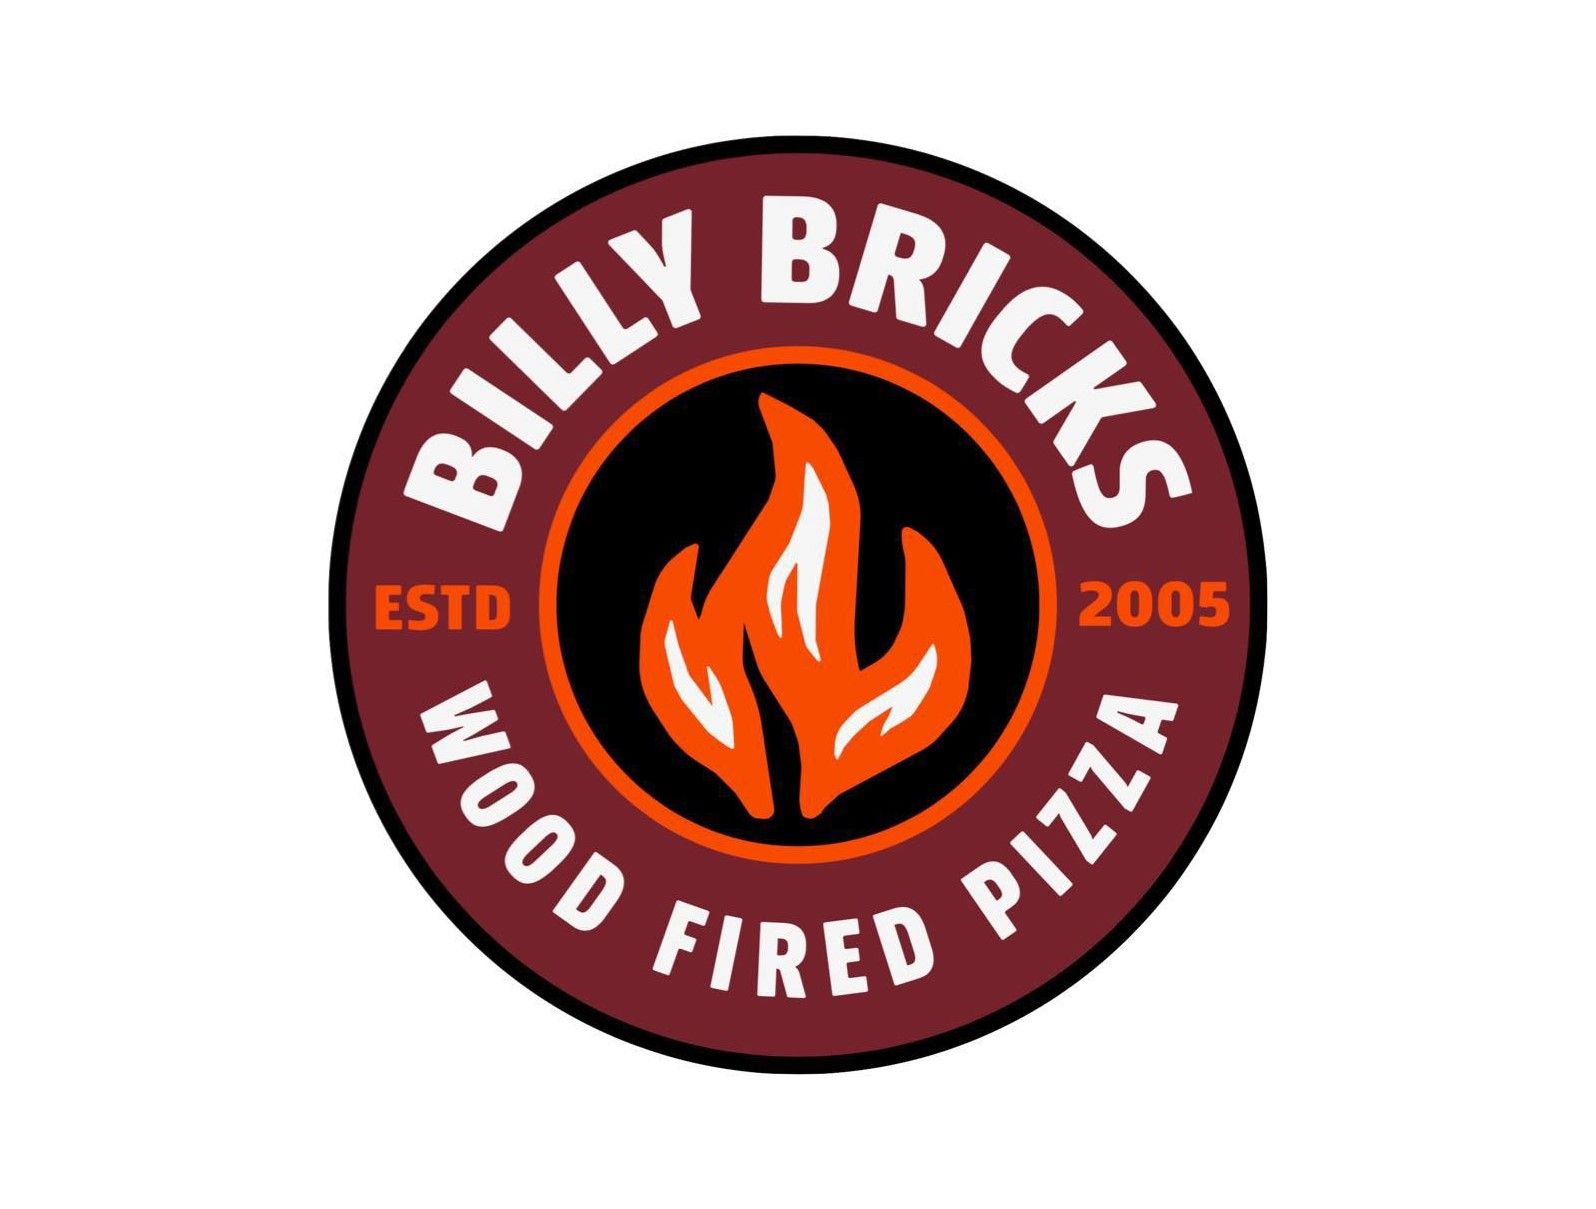 Wood and Family Inspired - Billy Bricks Restaurant Group